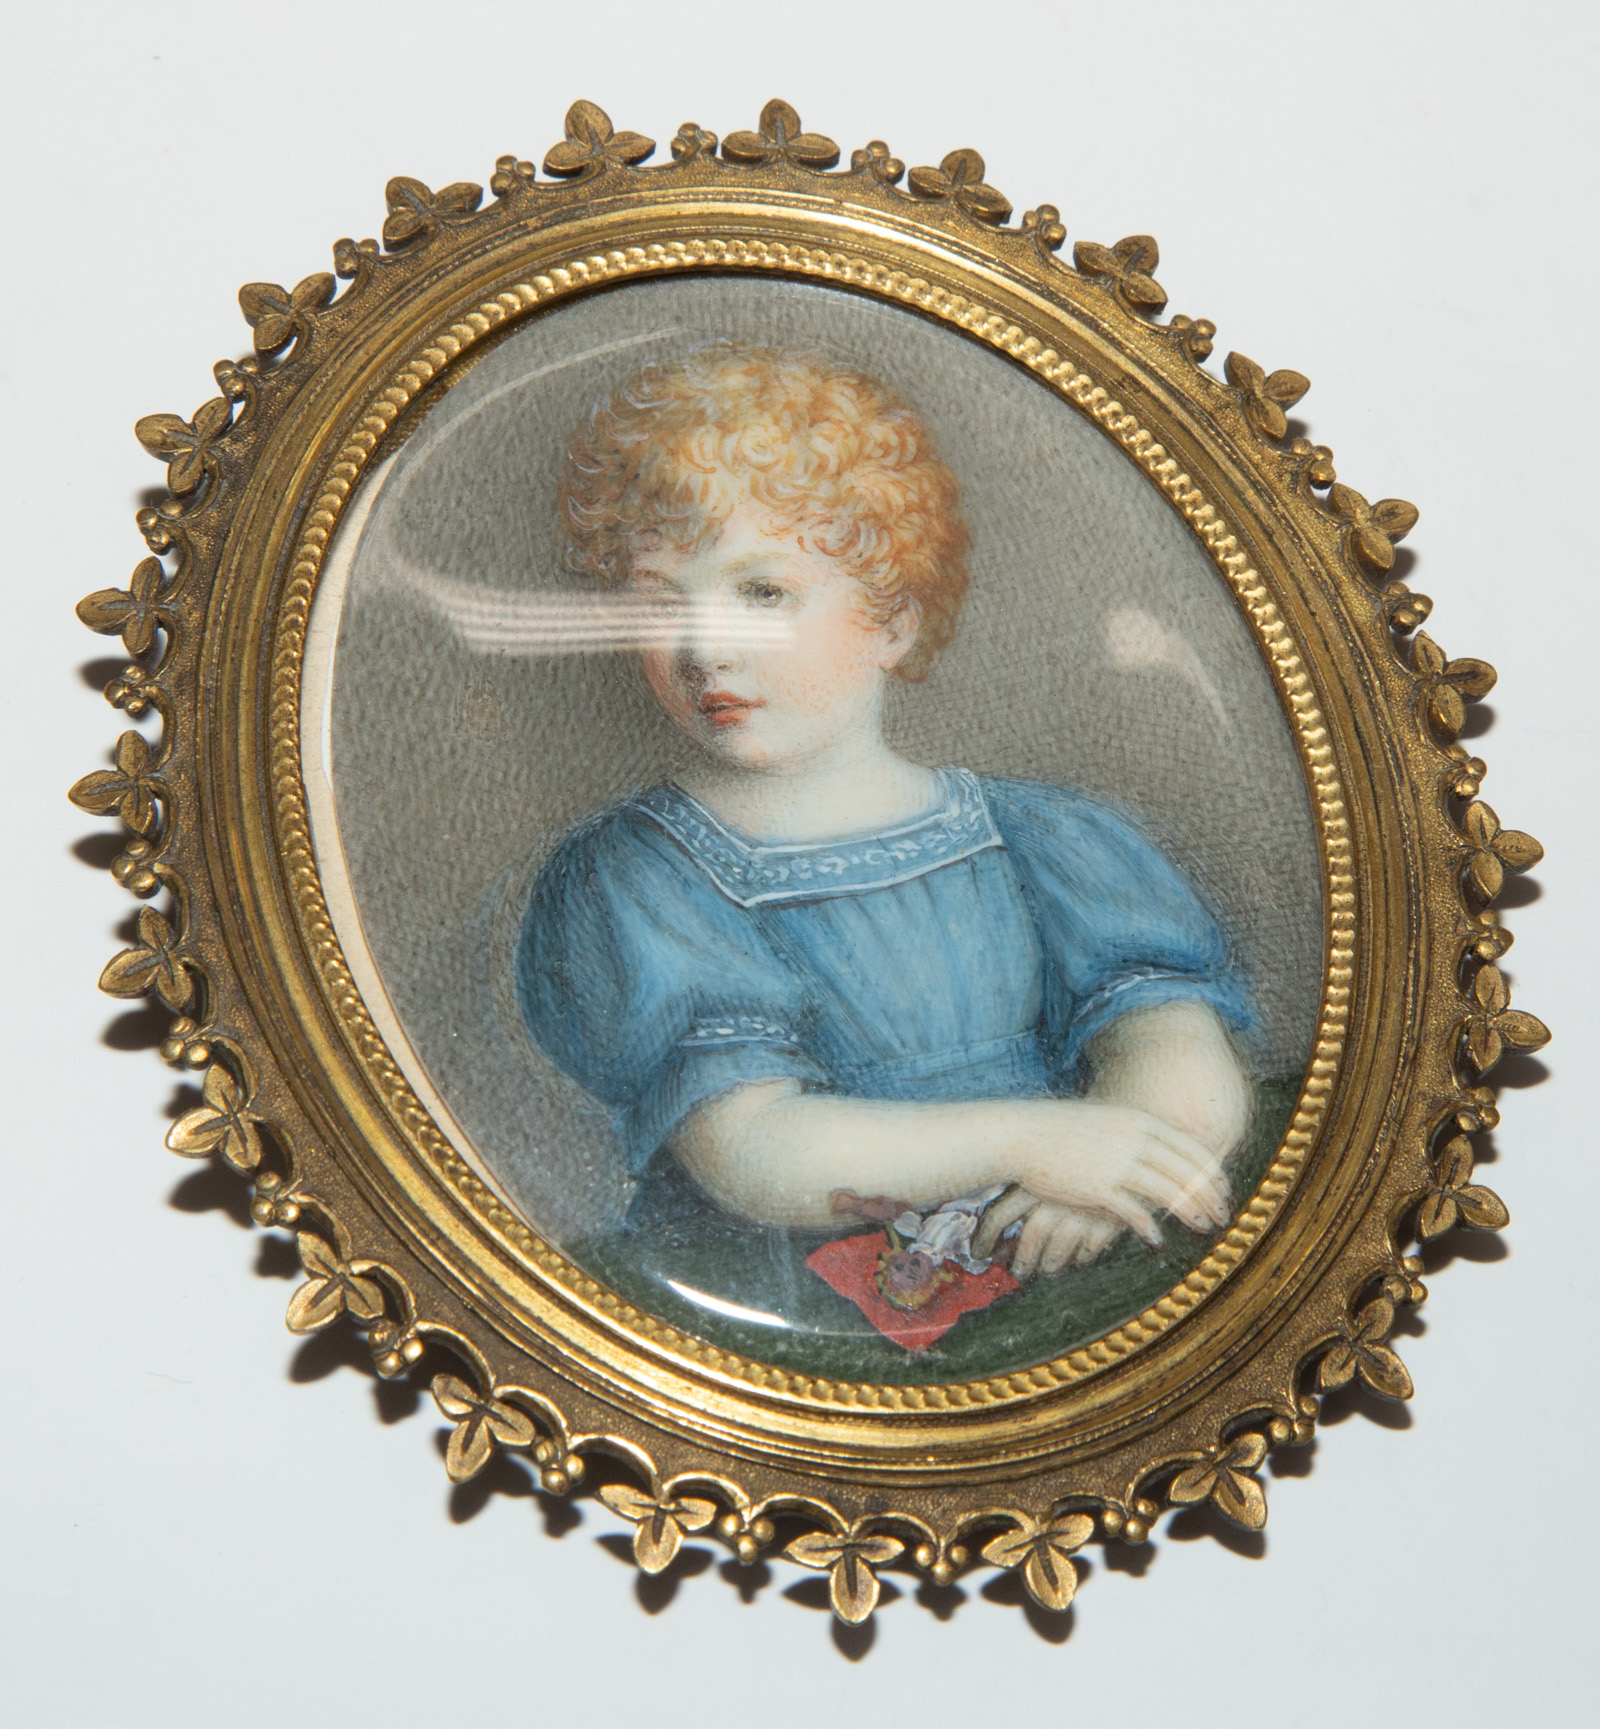 MINIATURE PORTRAIT OF YOUNG GIRL The